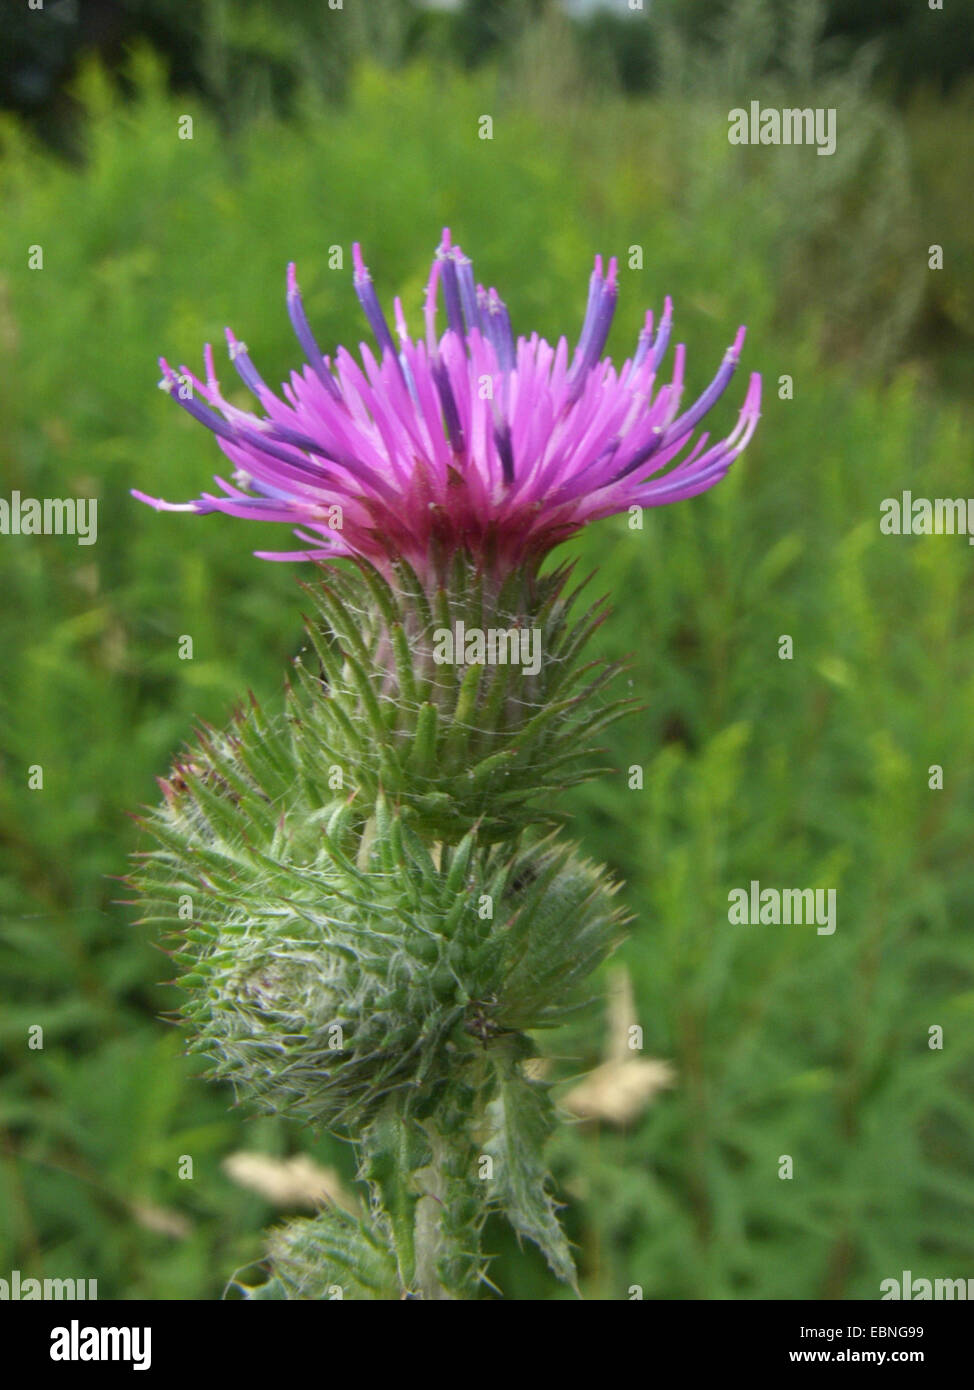 curled thistle, welted thistle, curled plumless-thistle (Carduus crispus), blooming inflorescence, Germany Stock Photo